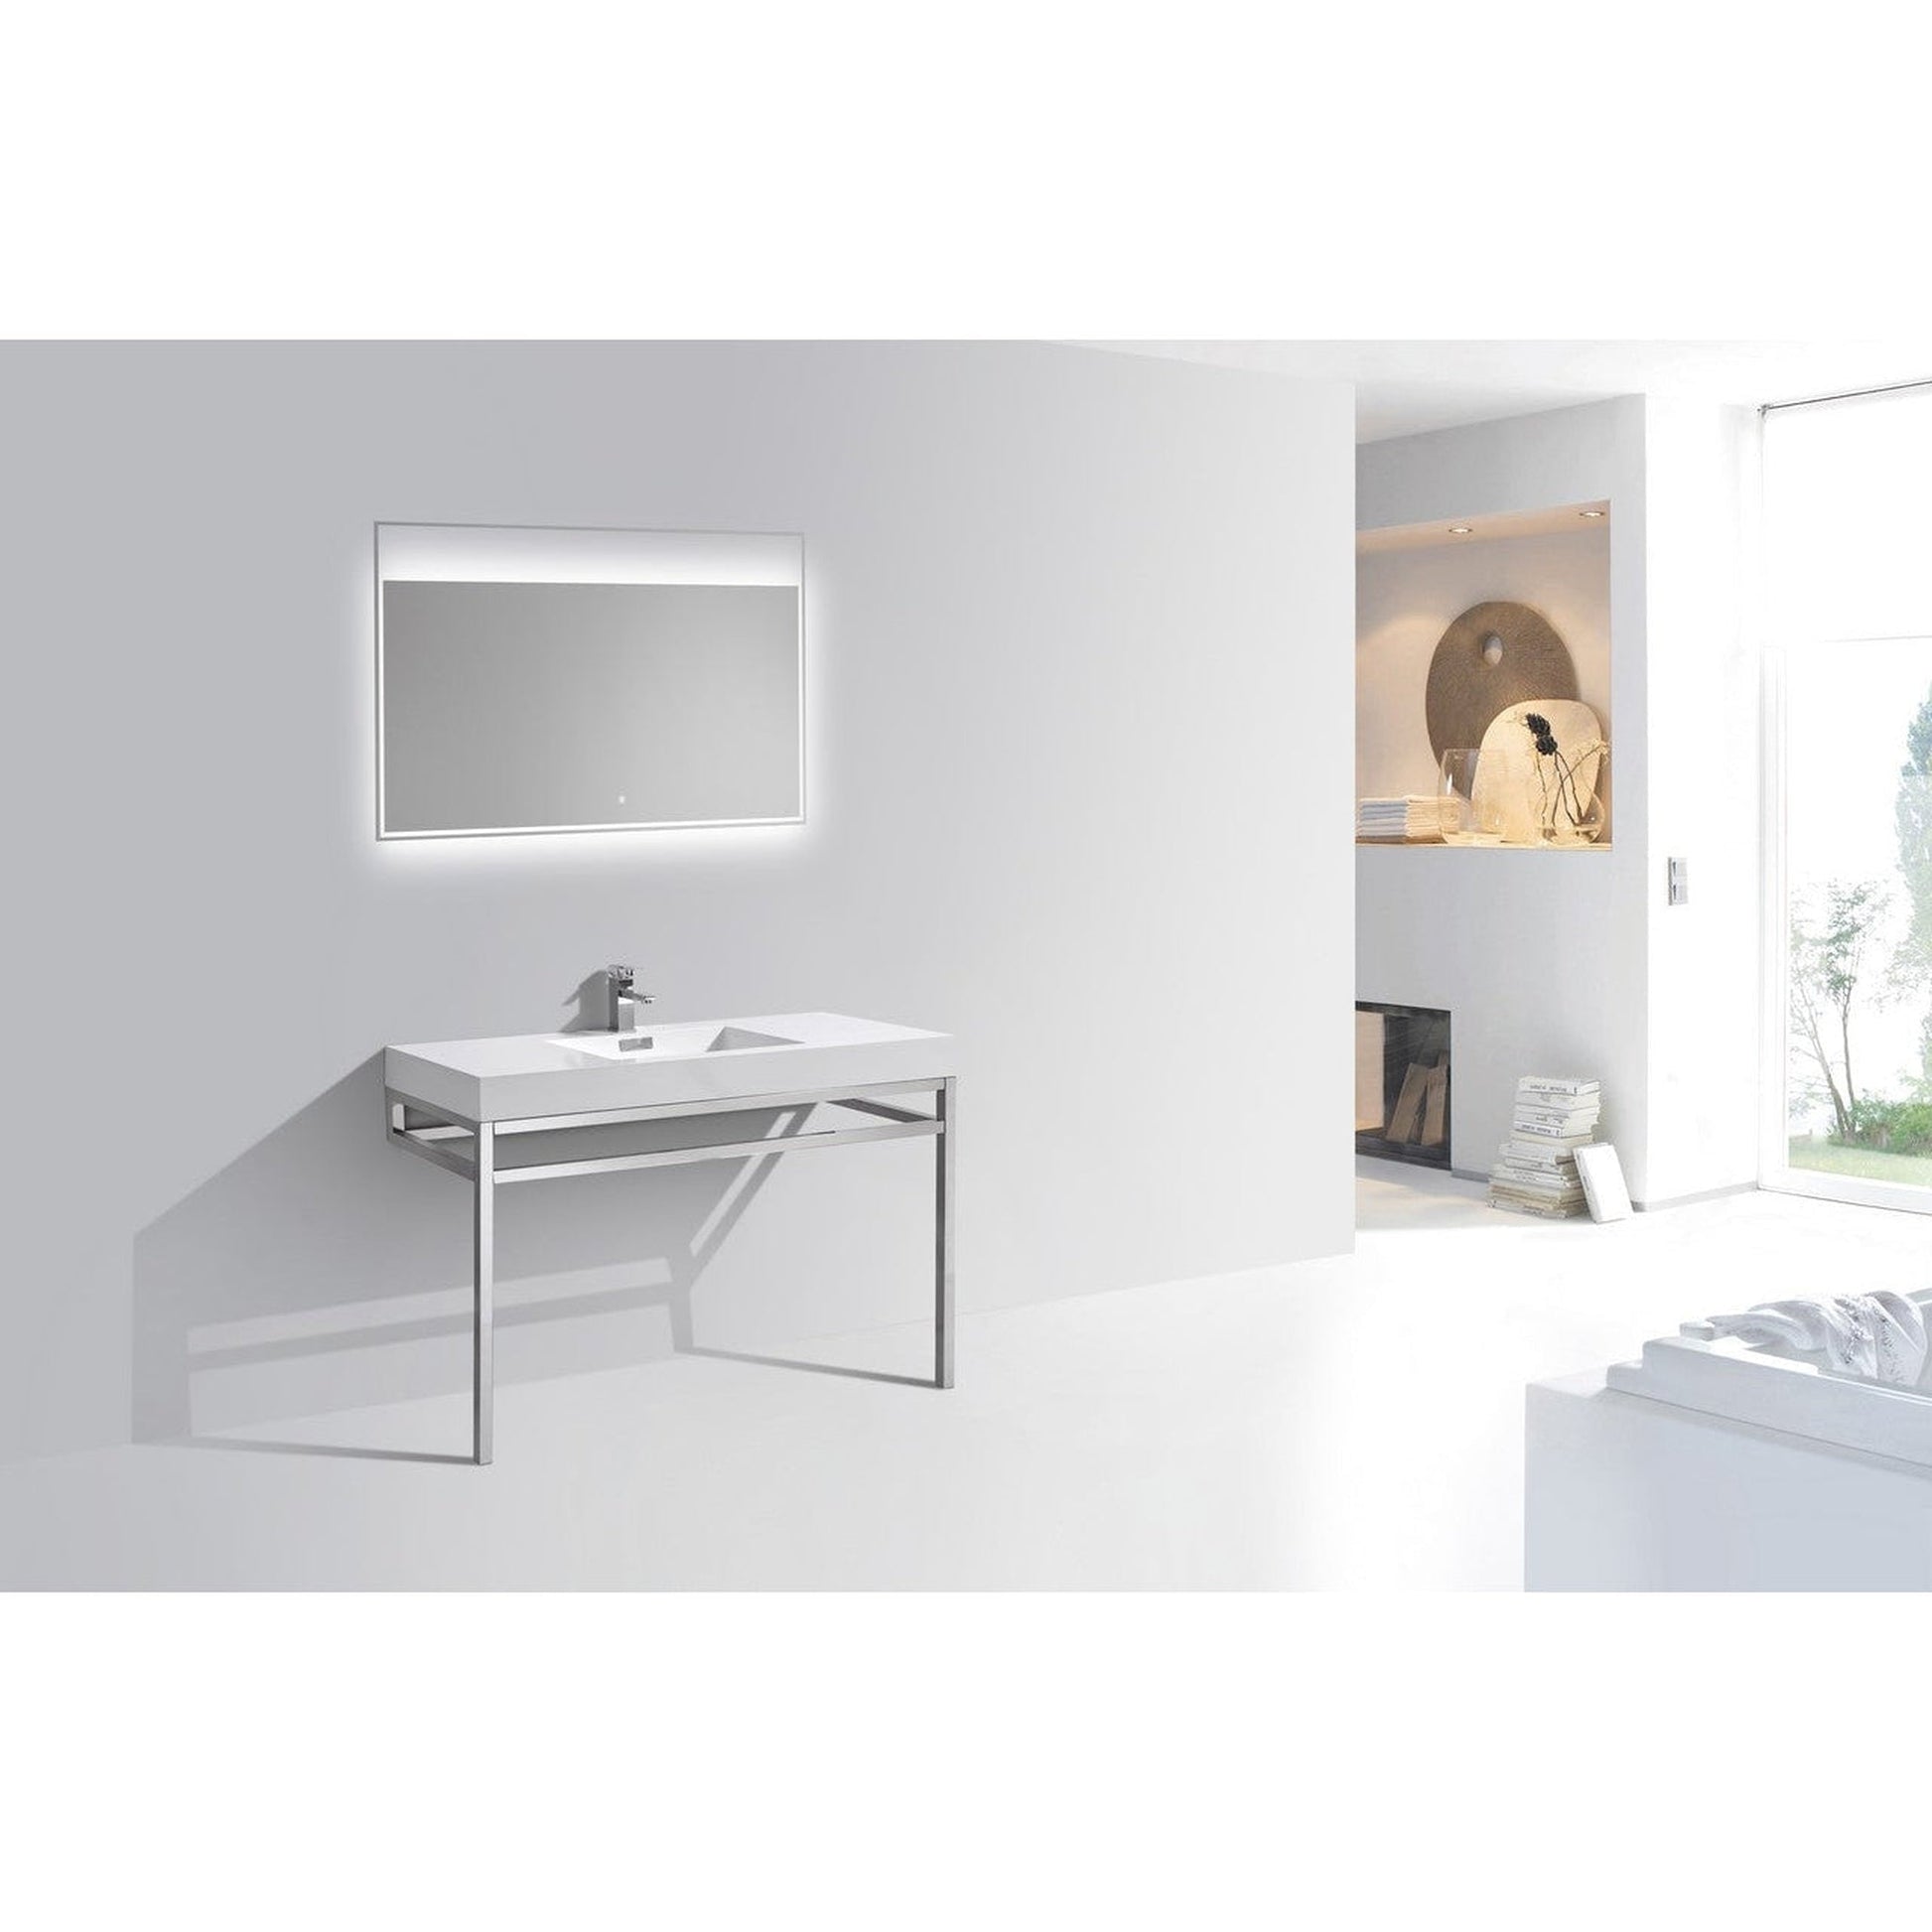 KubeBath Haus 48" White Acrylic Sink With Chrome Finish Stainless Steel Console And 48" White Framed Mirror With Shelf